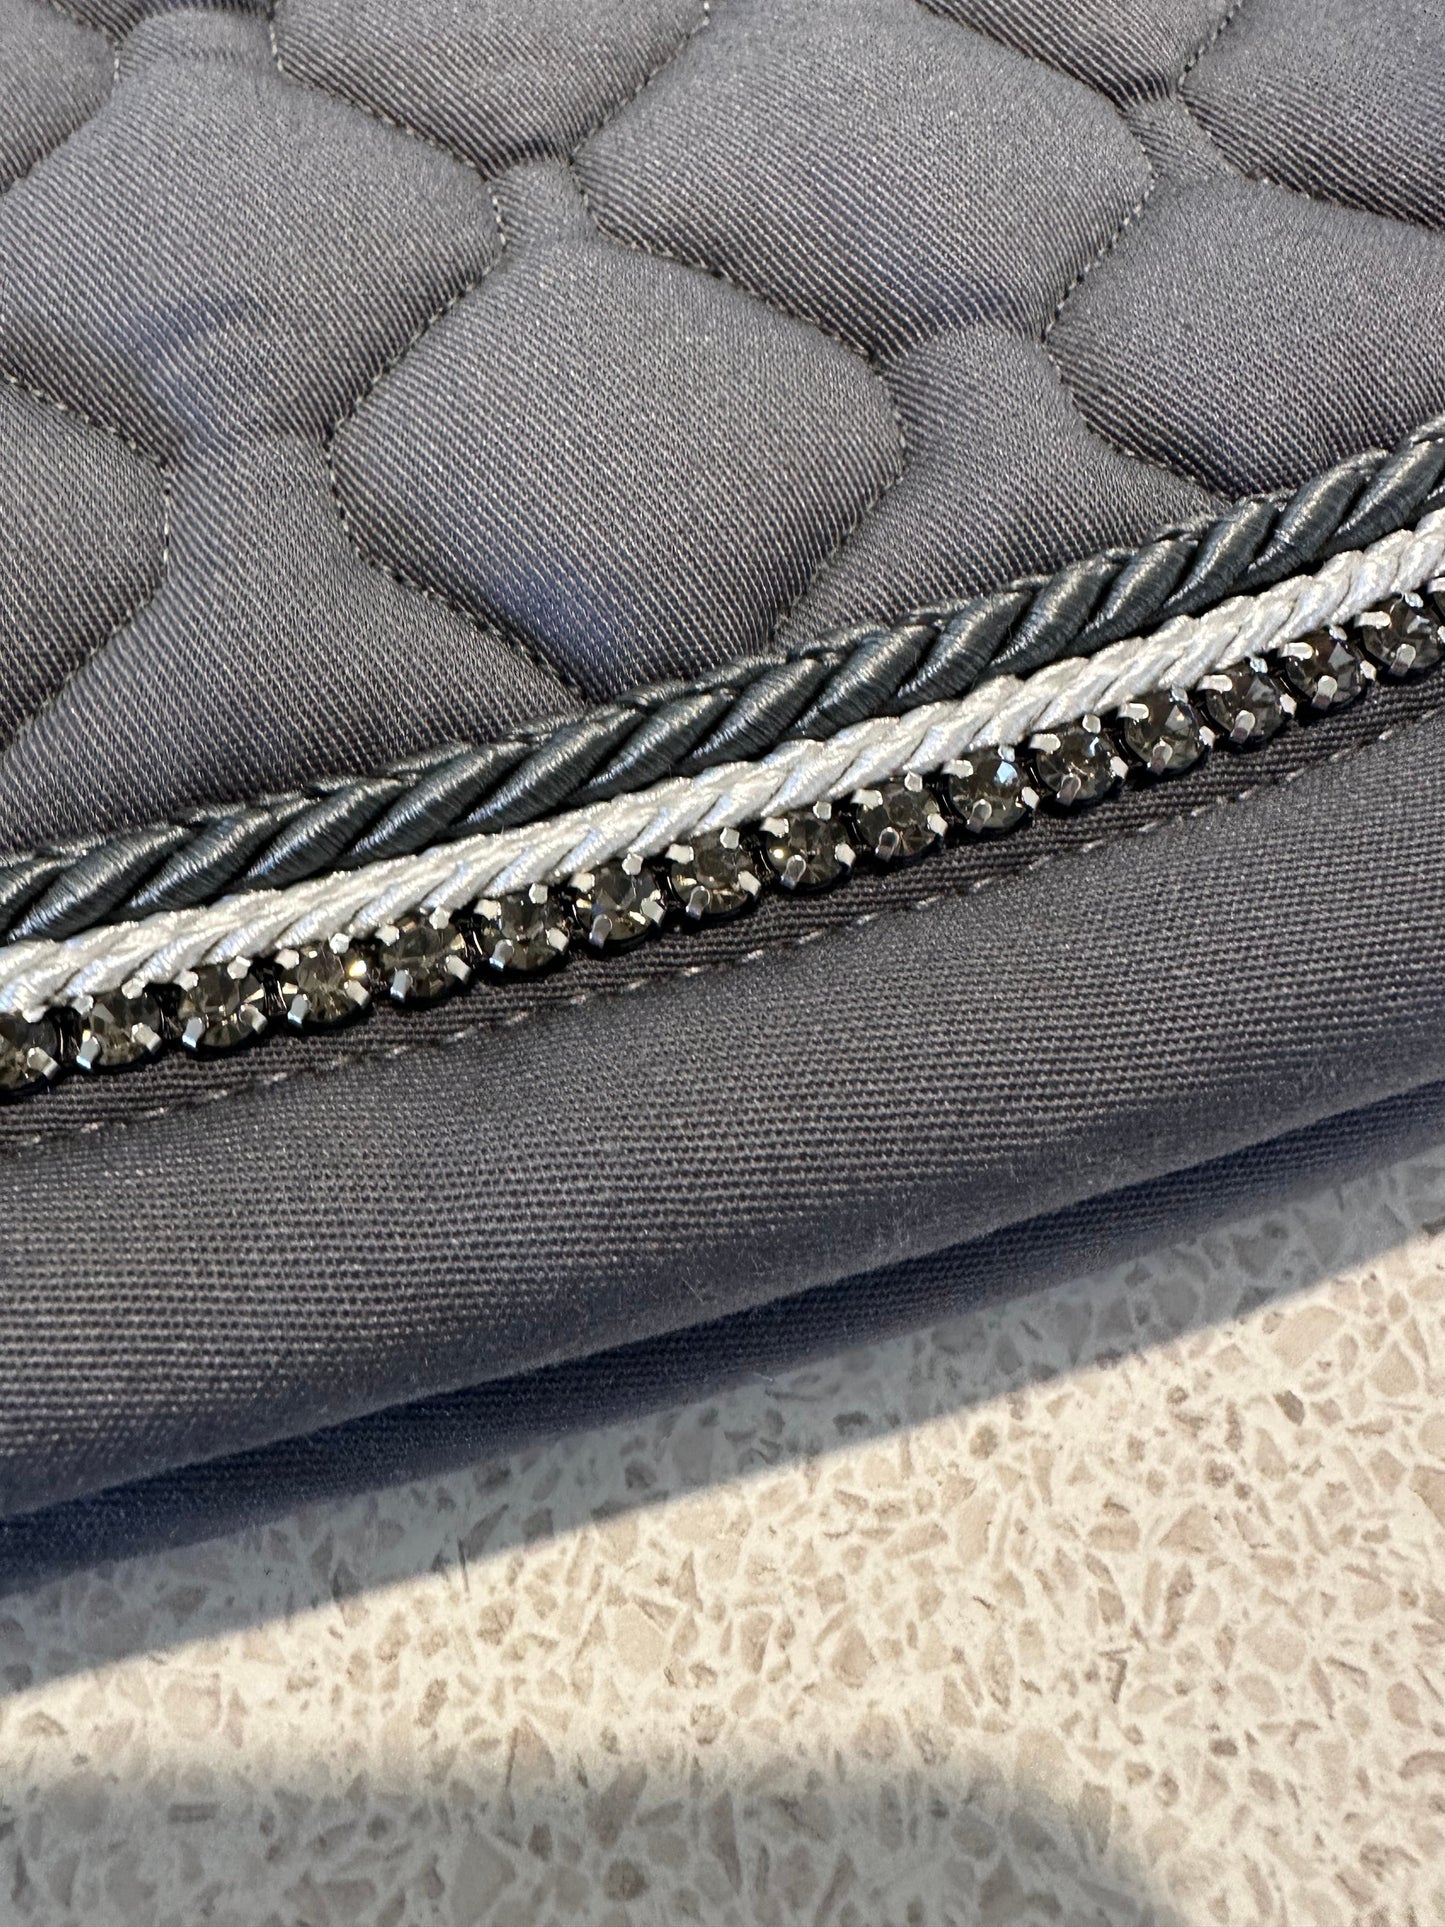 Anna Scarpati saddle pad with crystal detail and braided cording.